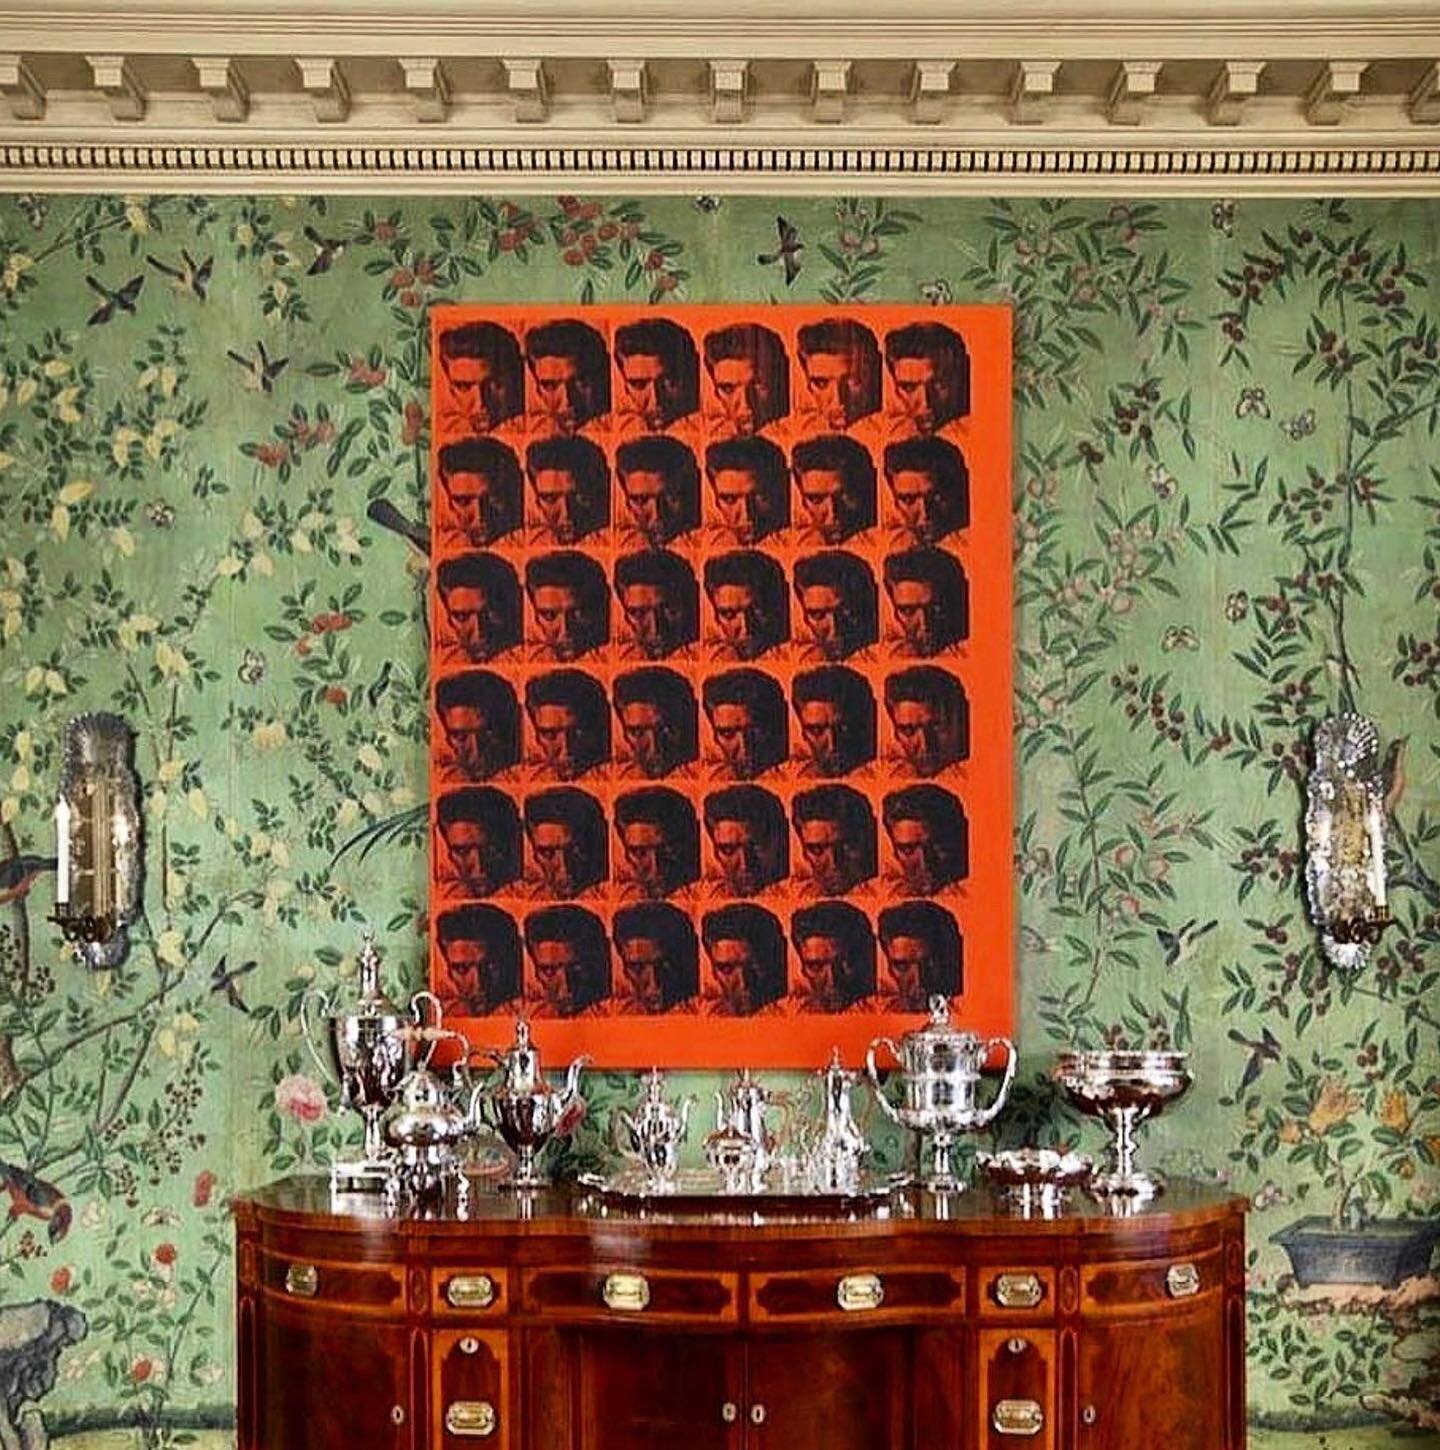 Andy Warhol&rsquo;s &ldquo;Red Elvis,&rdquo; 1962, in the Jed Johnson-designed home of Peter Brant. ⁠
⁠
Via @art_collectors_at_home ⁠
#jedjohnson #andywarhol #warhol #brantfoundation #thebrantfoundation #jeanmichelbasquiat #jeffkoons #francescoclemen